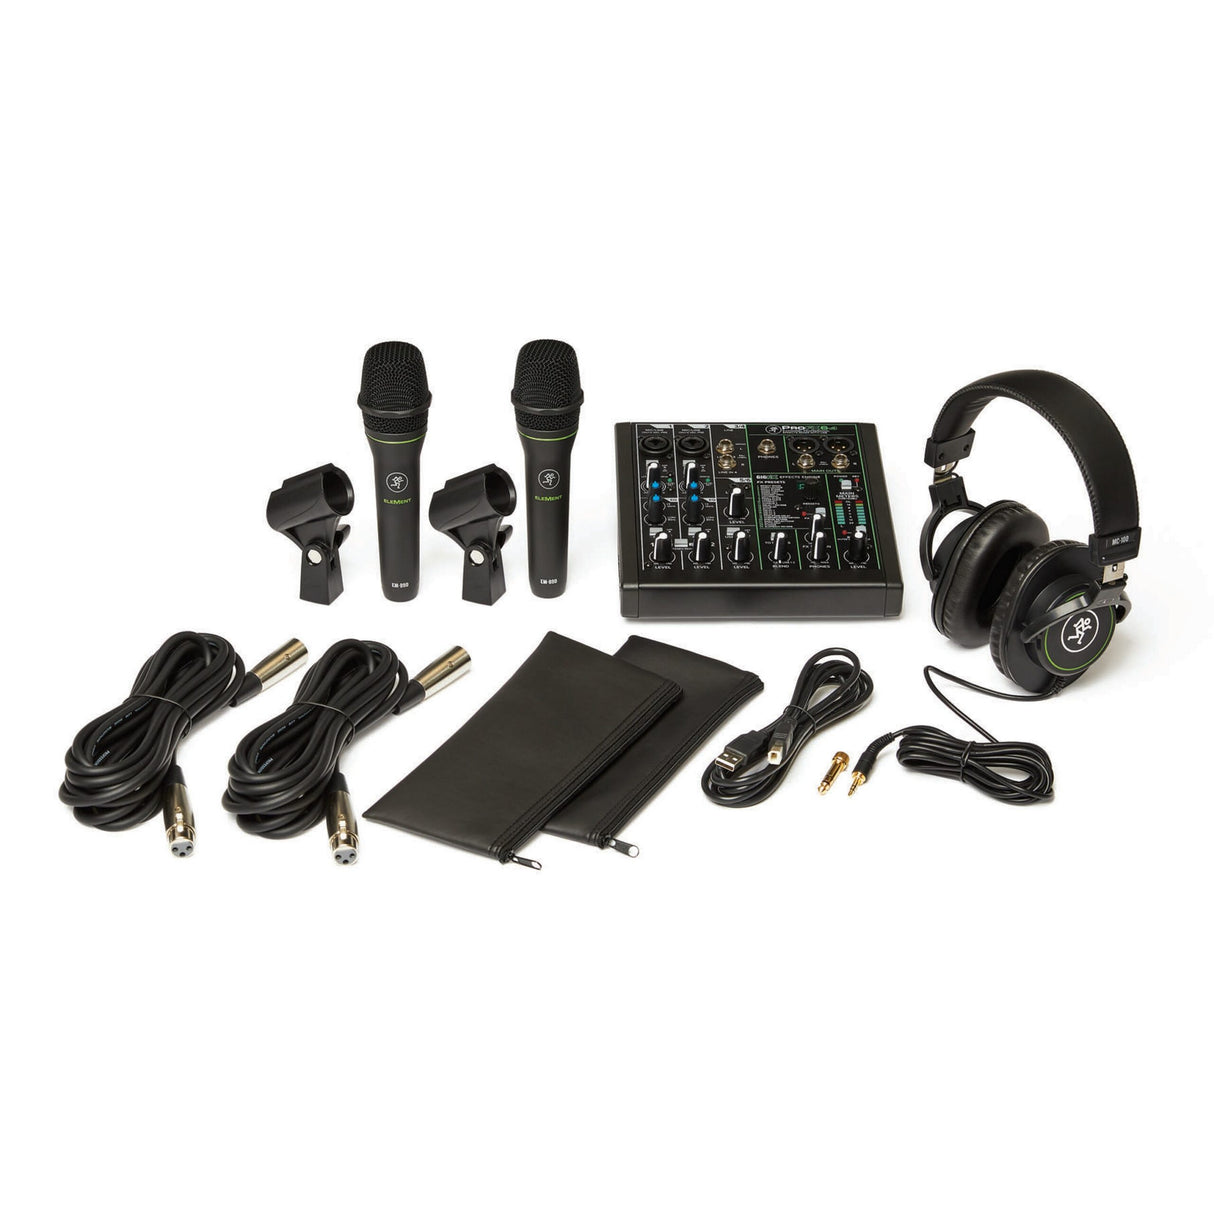 Mackie Performer Bundle with ProFX6v3 Mixer, 2 EM89D Dynamic Microphones and MC-100 Headphone